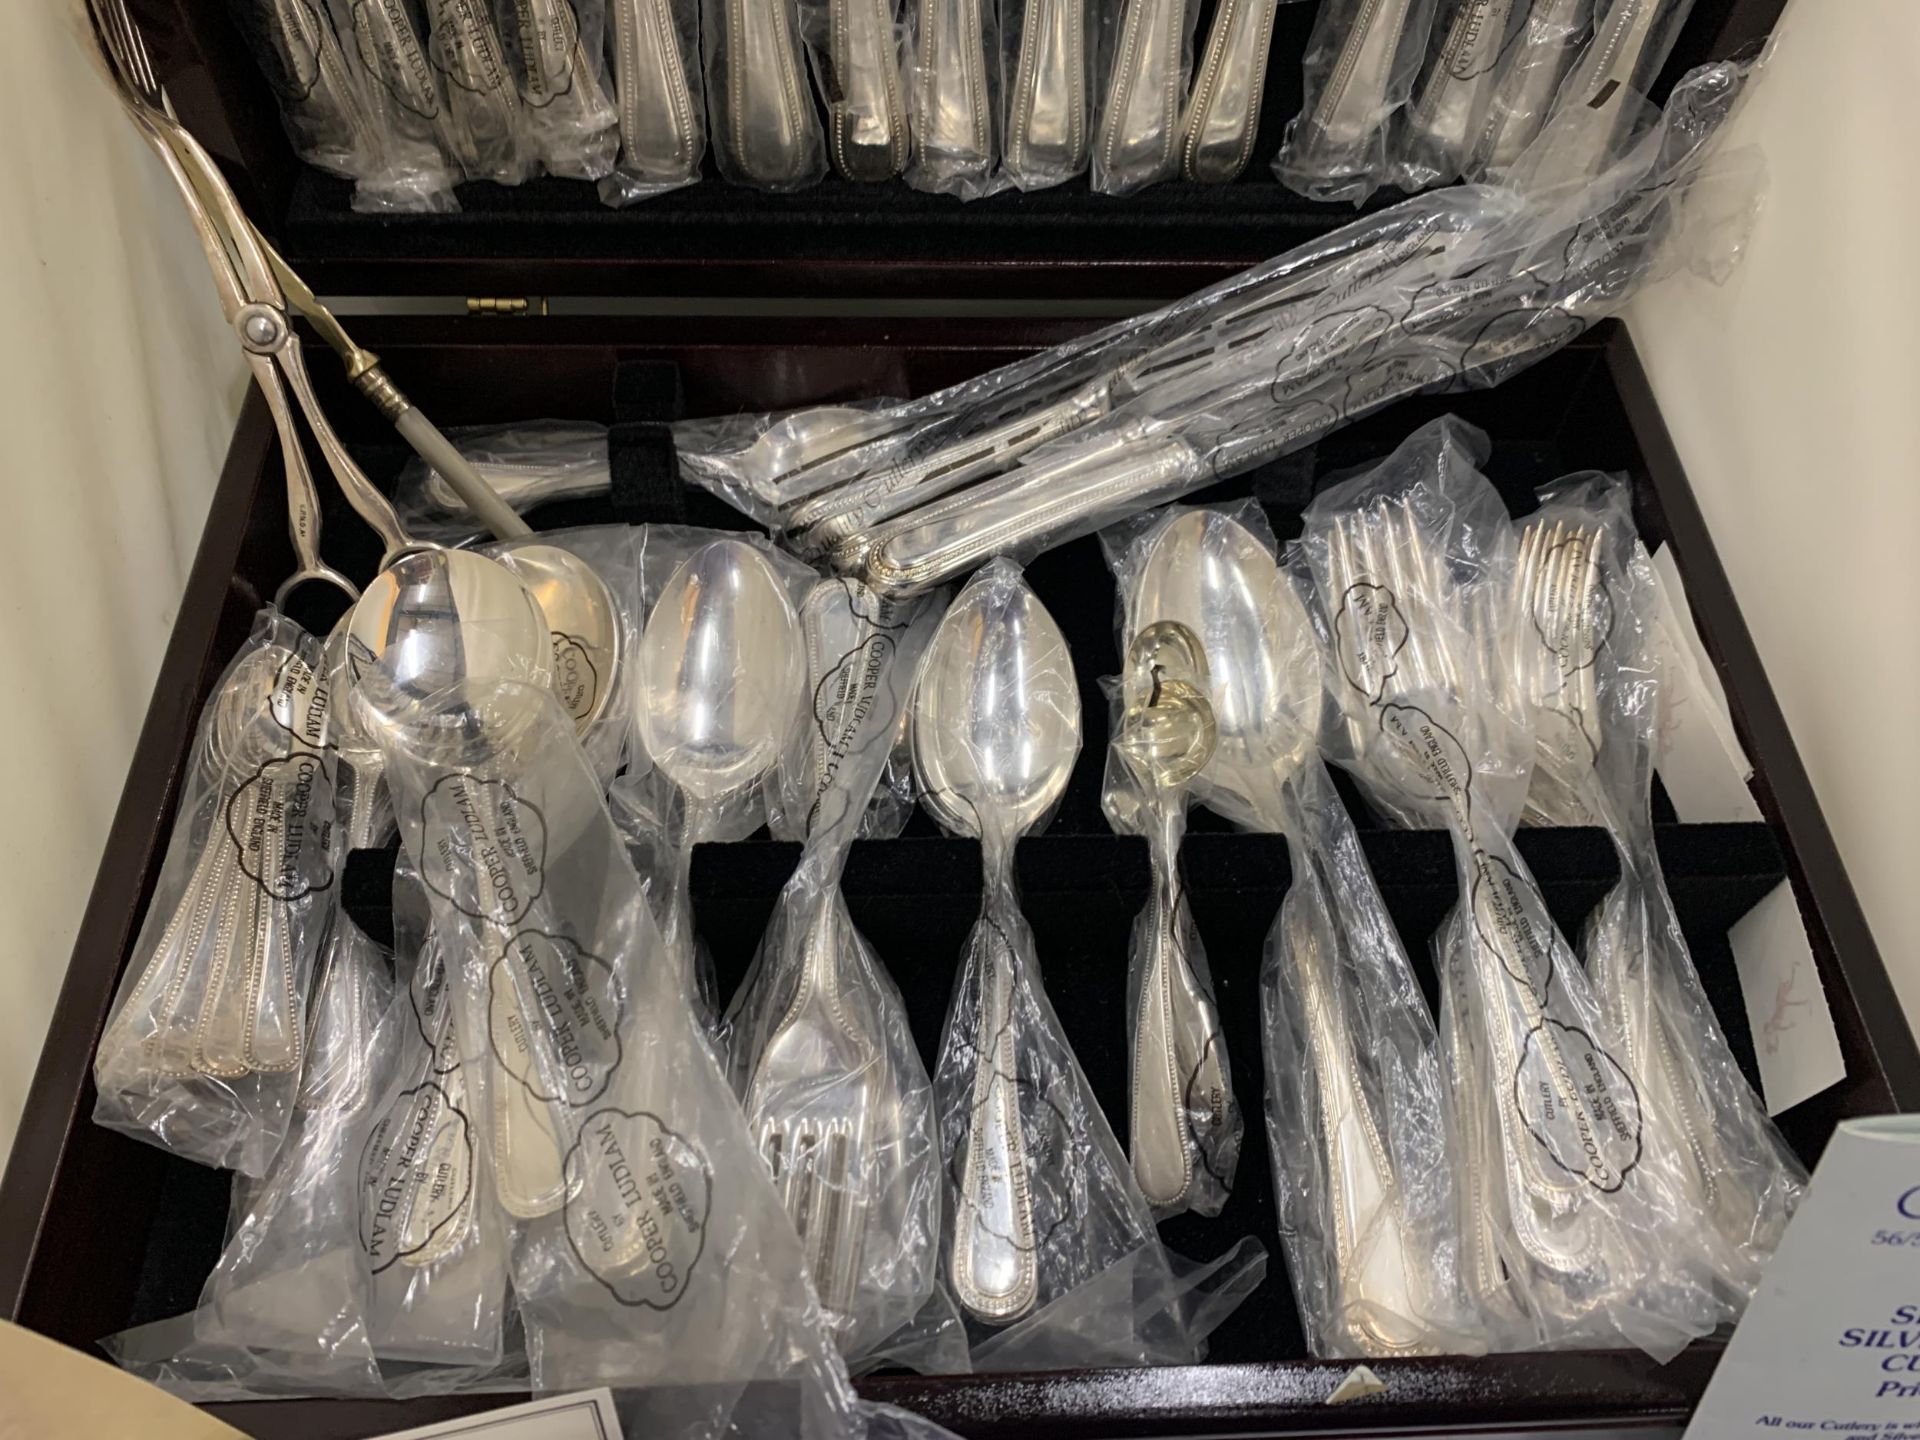 A COOPER LUDLAM SHEFFIELD CANTEEN OF CUTLERY STILL IN ORIGINAL BAGS - Image 3 of 3